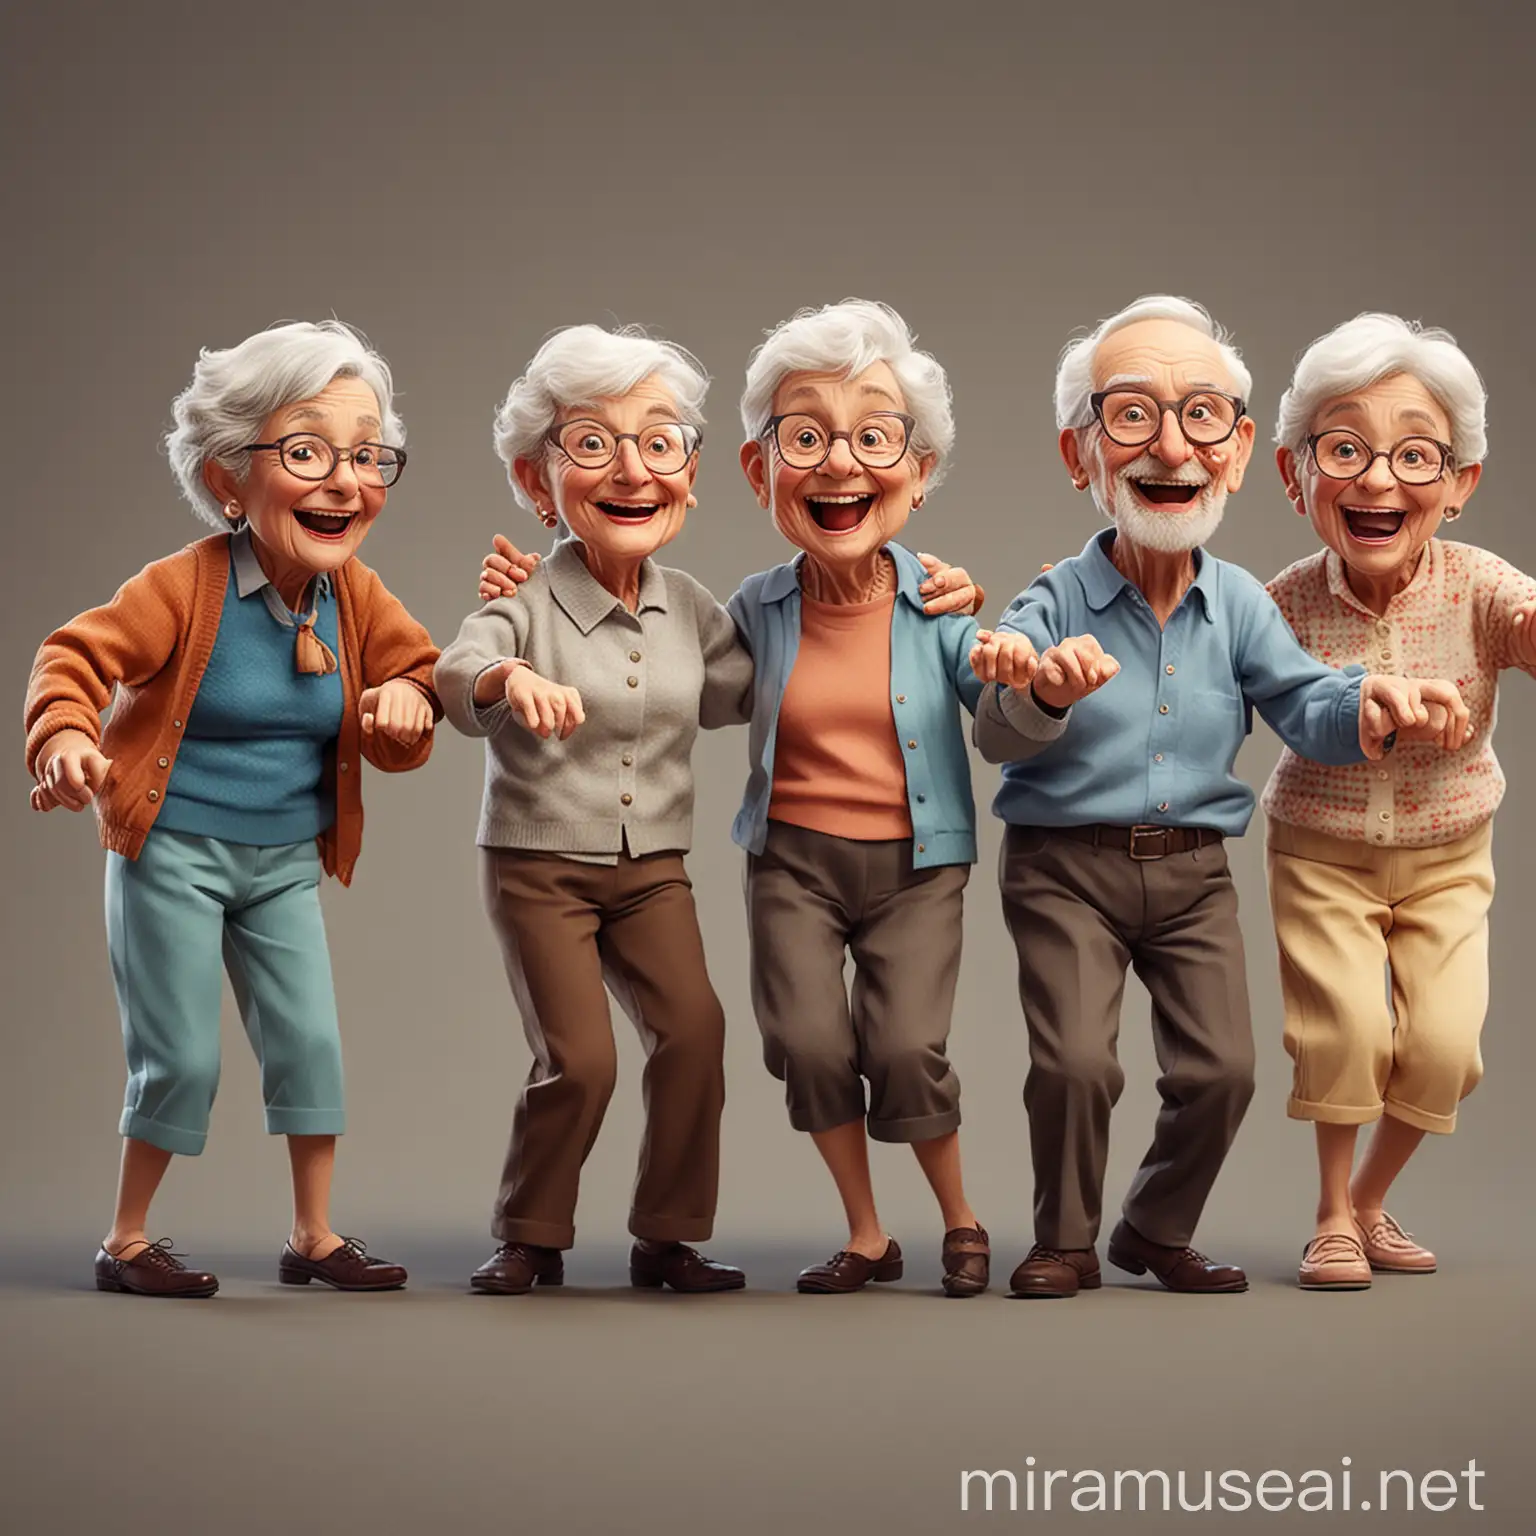 group of older people dancing animated